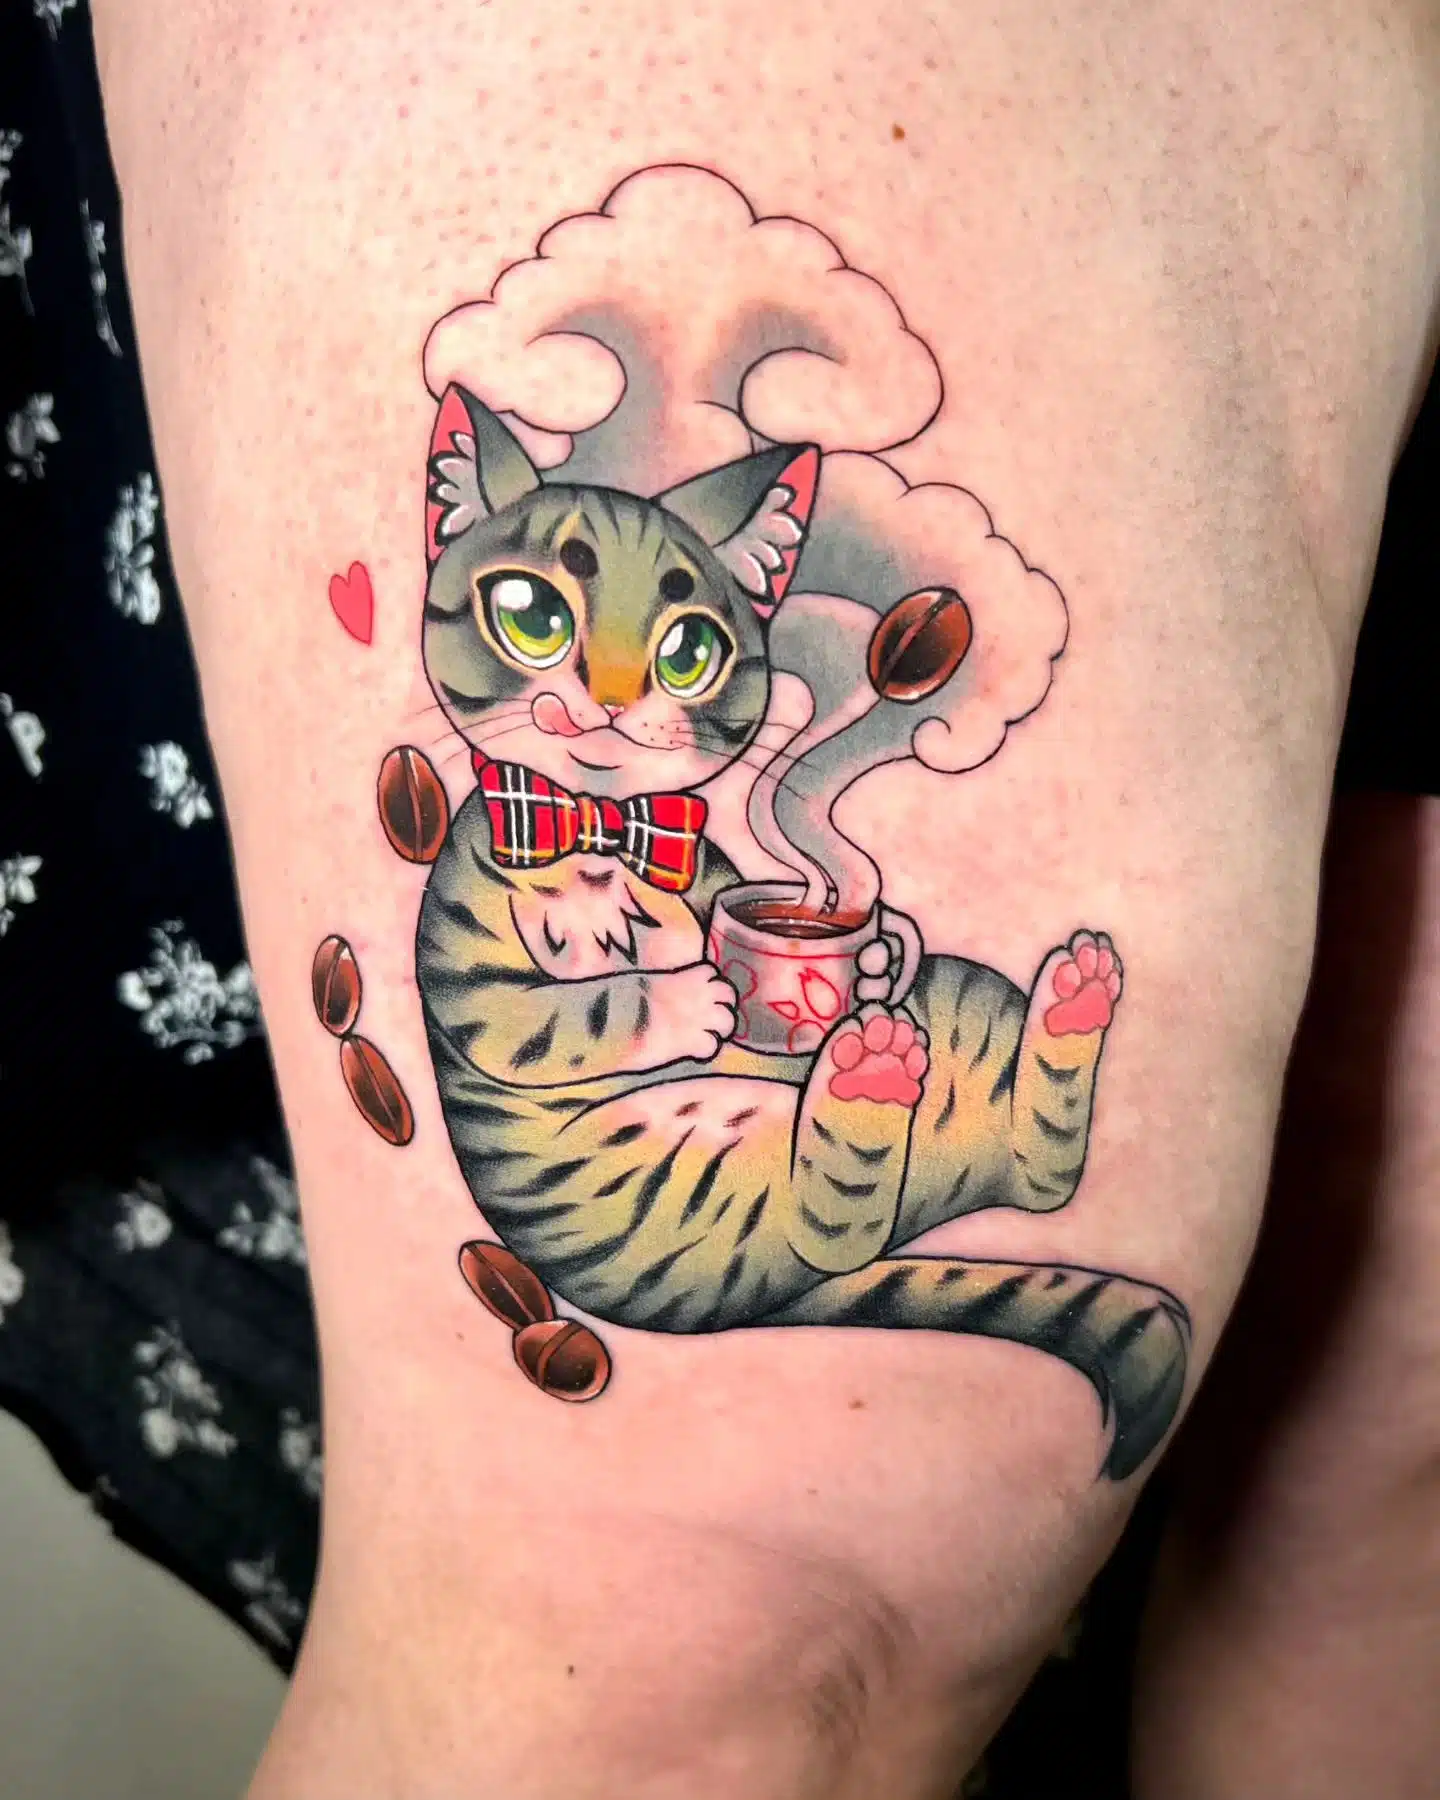 Coffee kitty! Sabrinas wee cat Nataliafied, so much cuteness!
naaat.j 

Supplies from our sponsors:
magnumtattoosupplies.uk
yayofamilia

Done using:
dankubin
allegoryink

                    totaltattoo